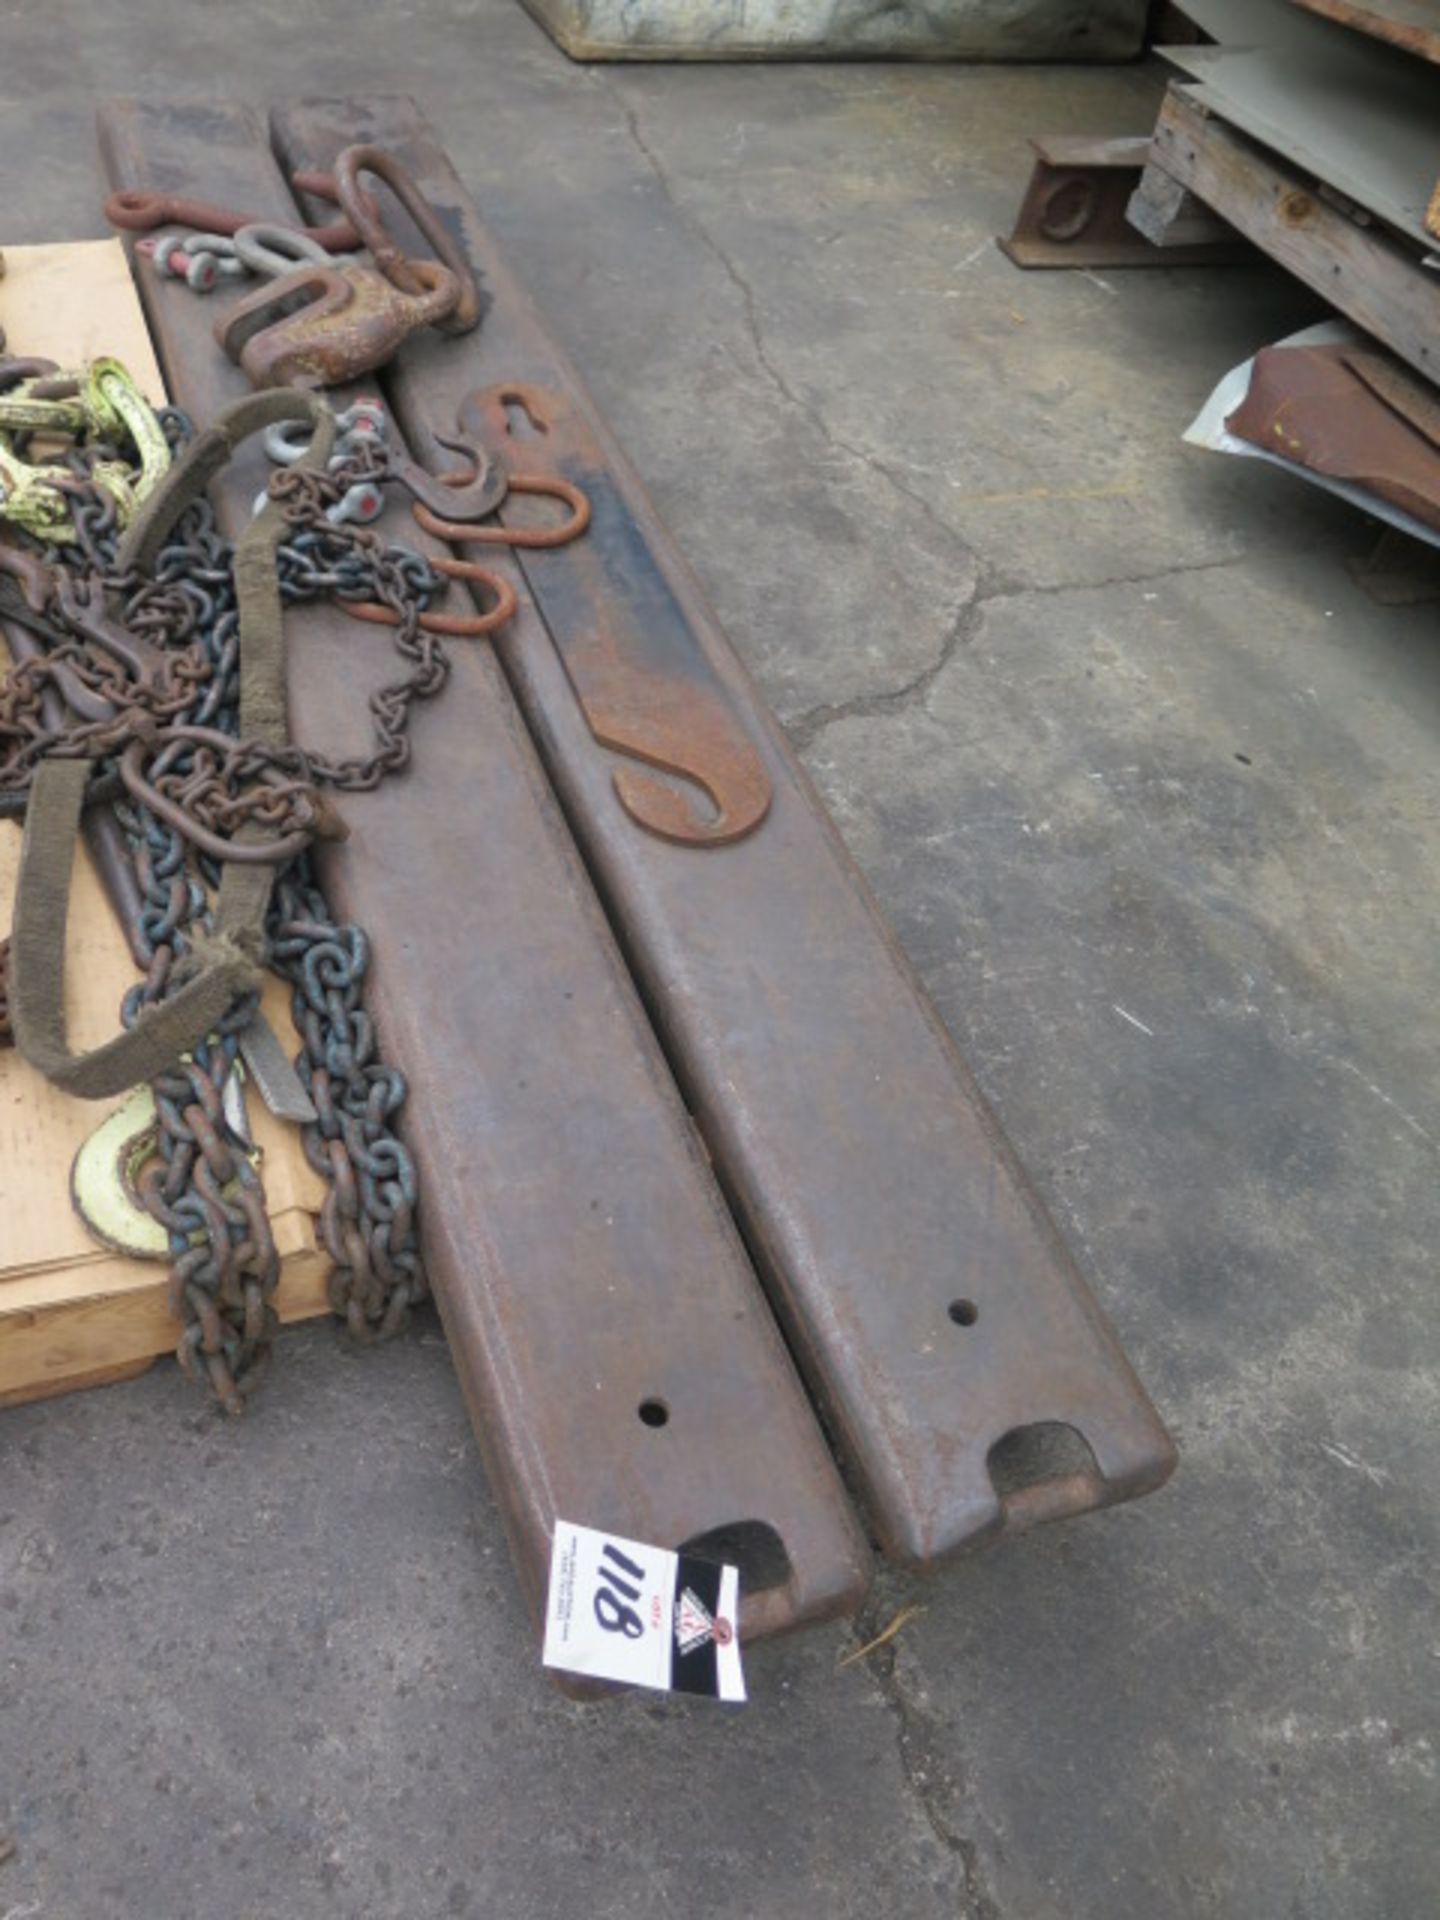 Forklift Extensions and Rigging Slings - Image 2 of 3